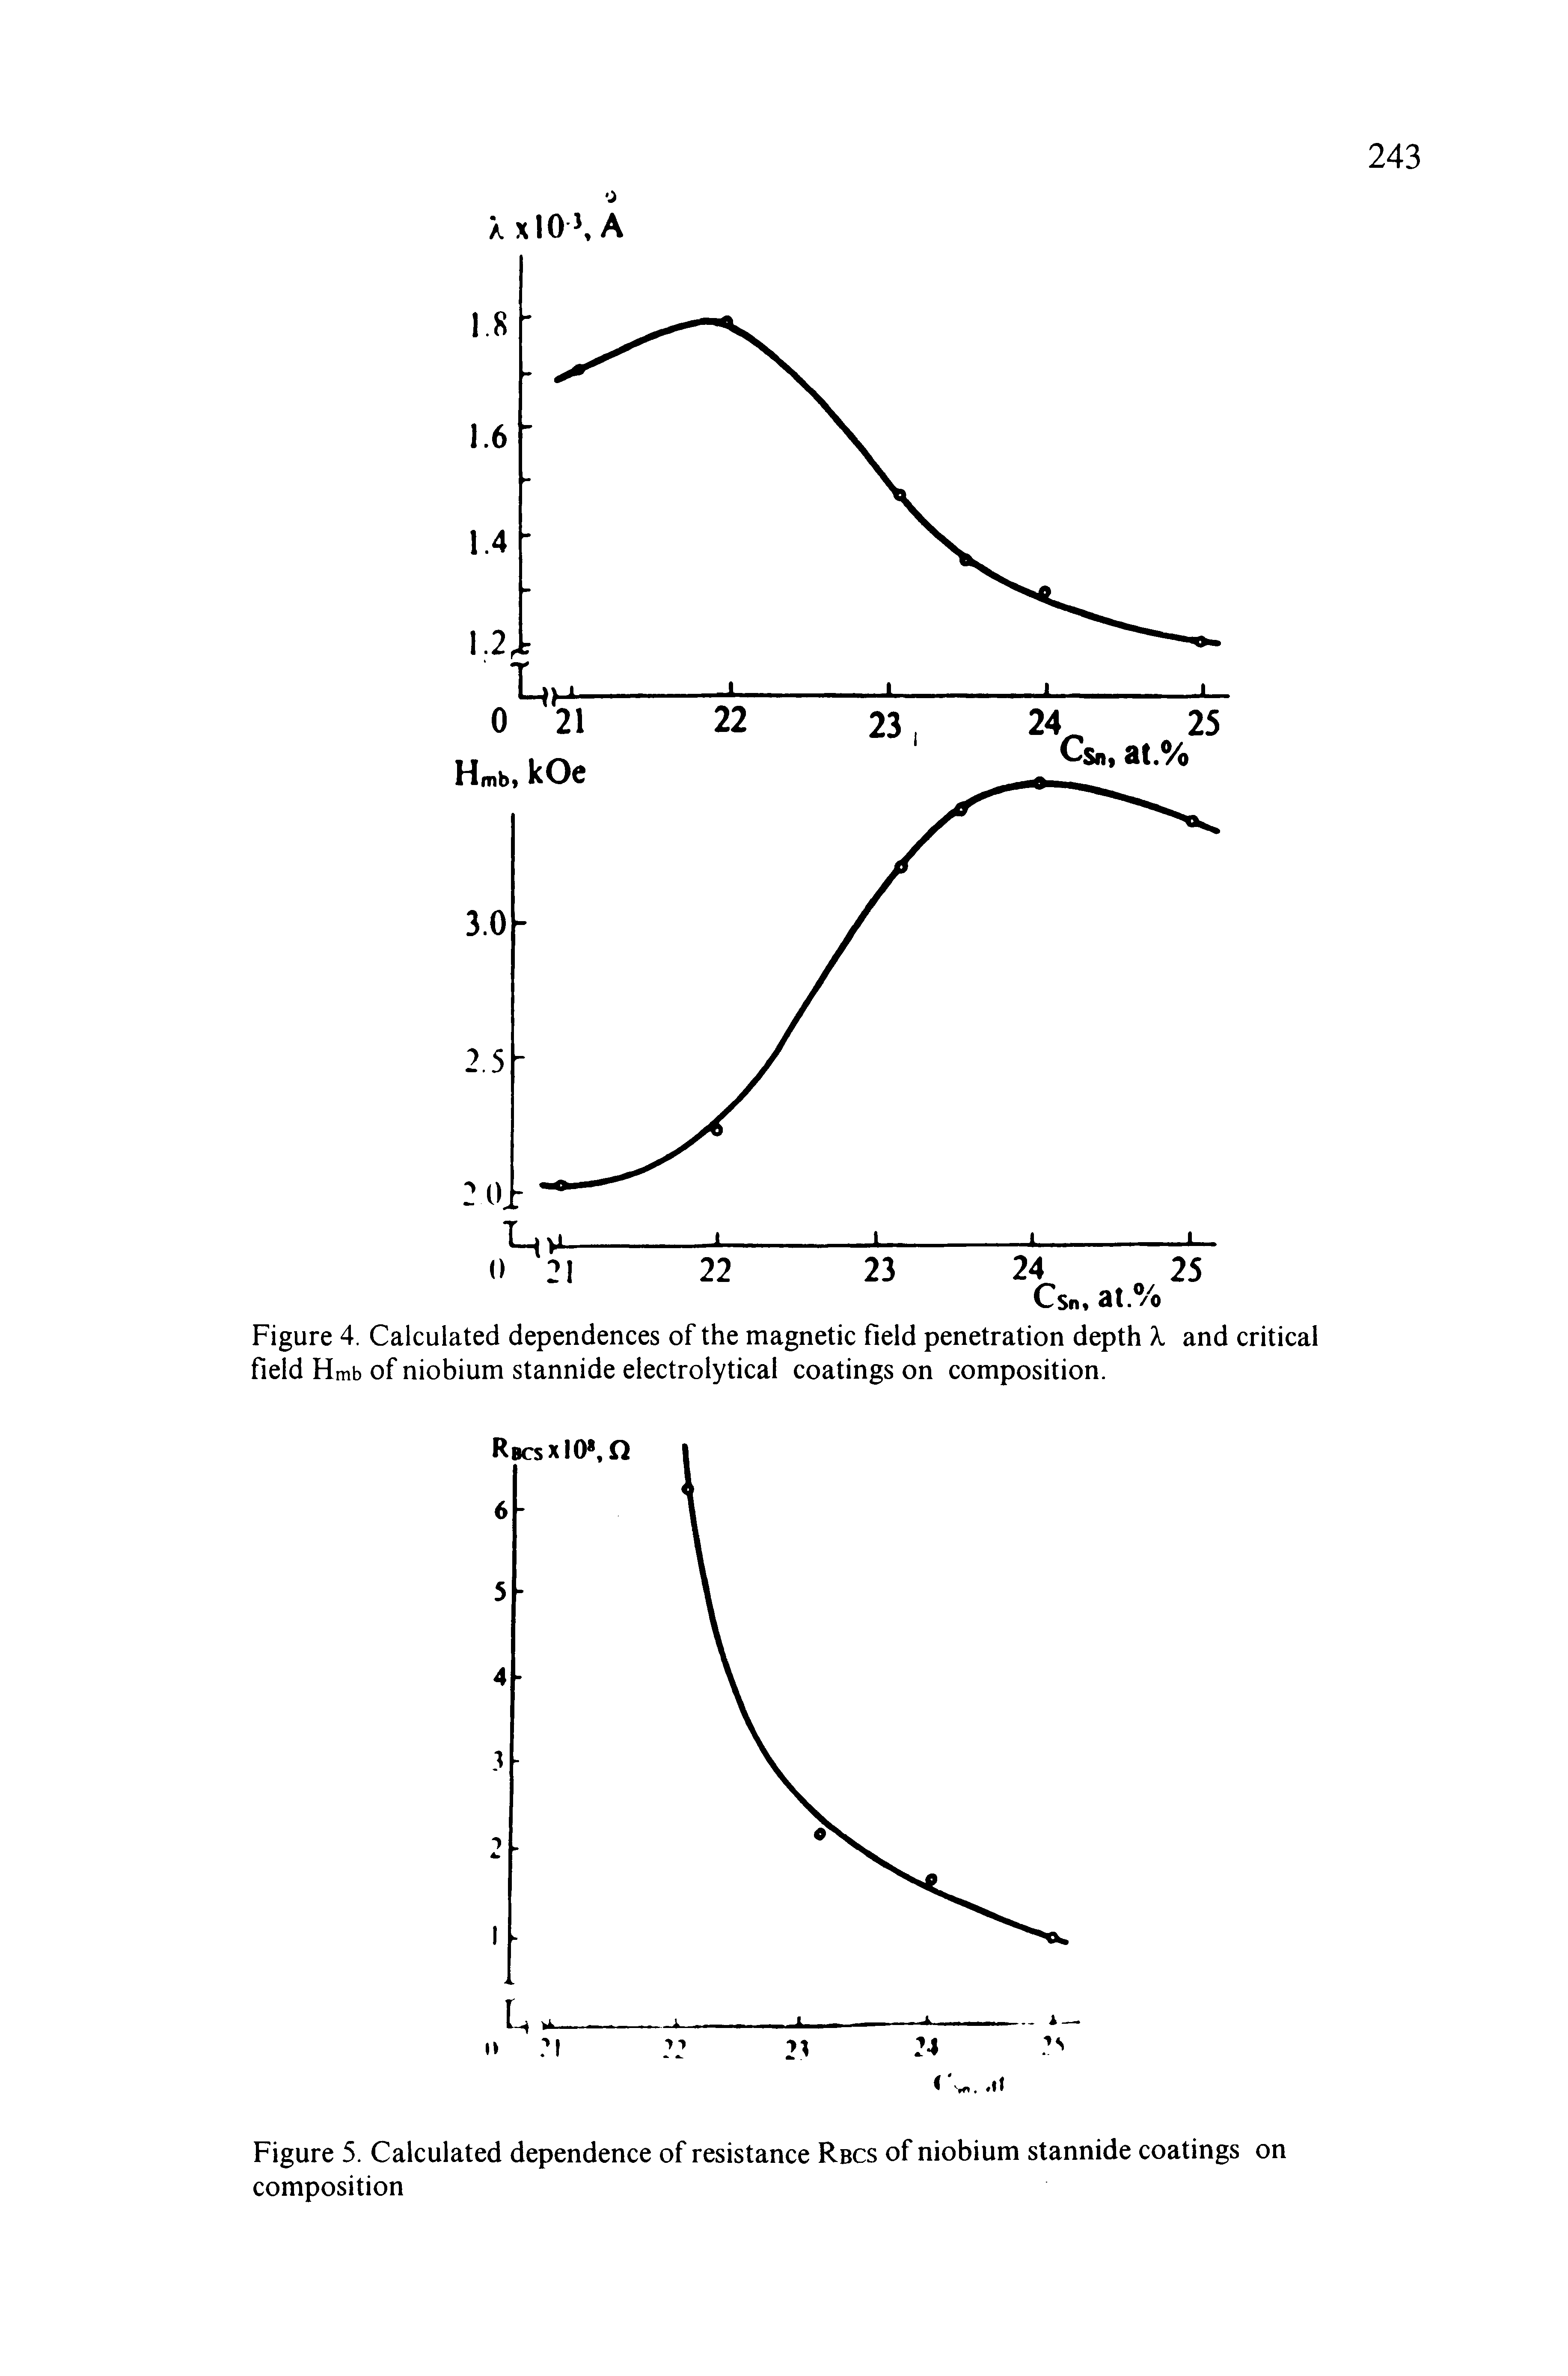 Figure 4. Calculated dependences of the magnetic field penetration depth X and critical field Hmb of niobium stannide electrolytical coatings on composition.